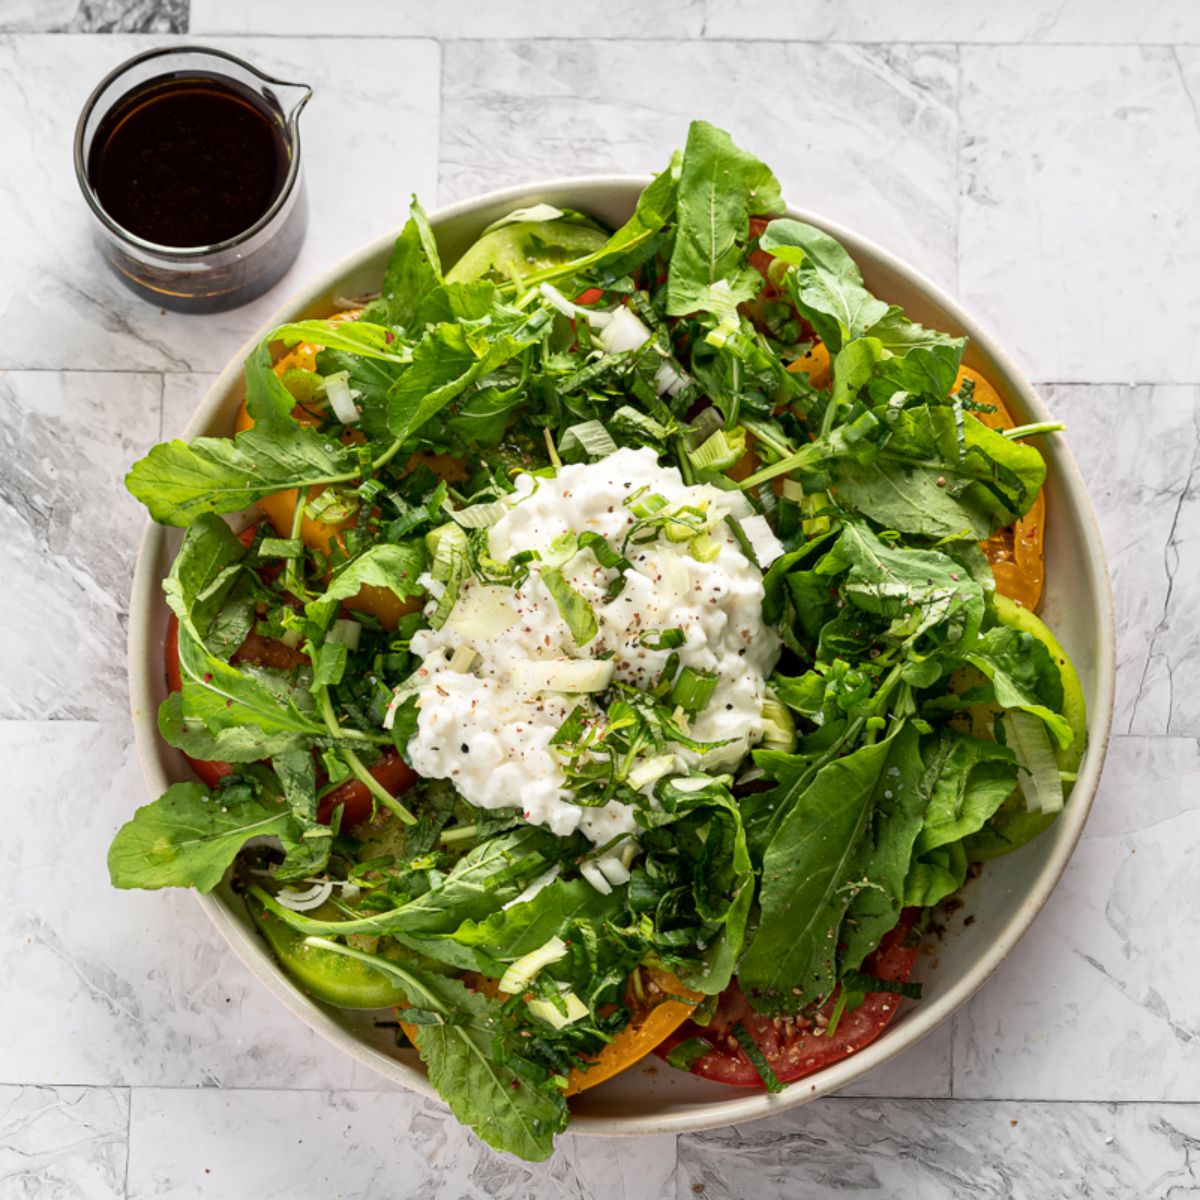 arugula and cottage cheese salad over sliced tomatoes with a balsamic vinaigrette to the top left hand corner of the image